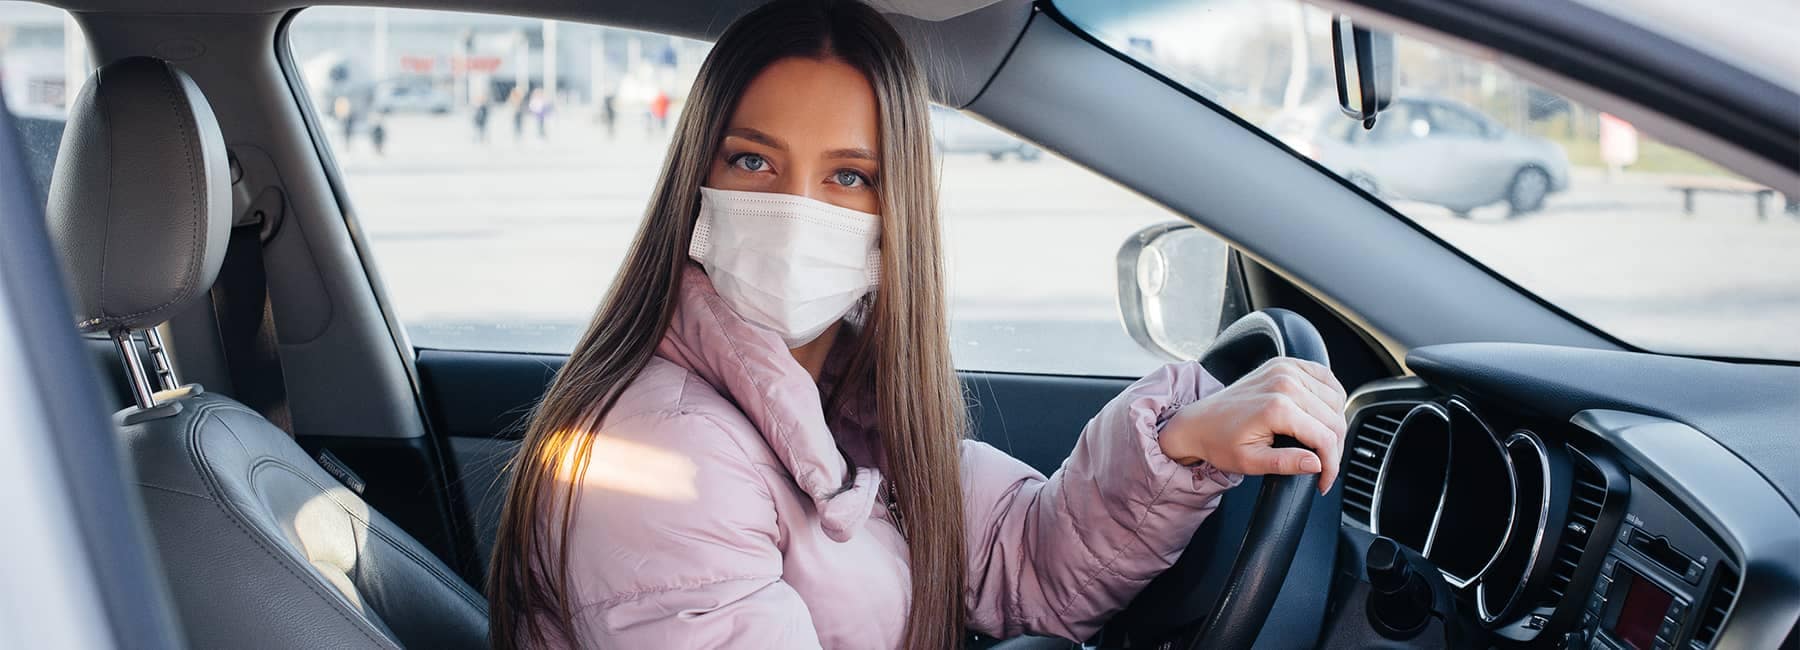 Female driver in a mask test driving a new car